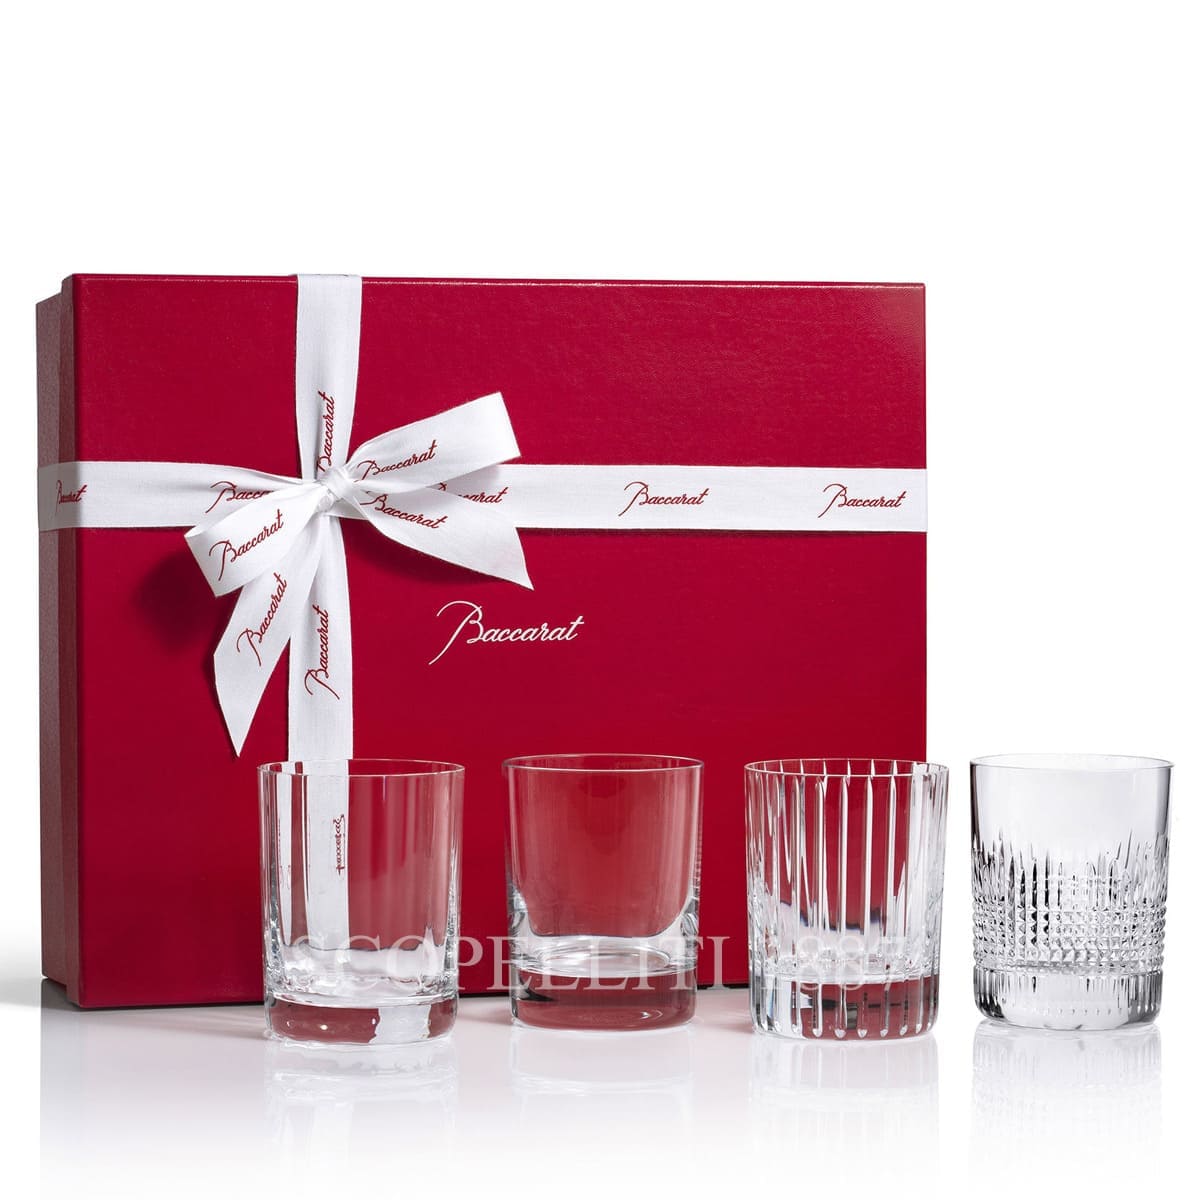 baccarat crystal french design elements tumbler set collection